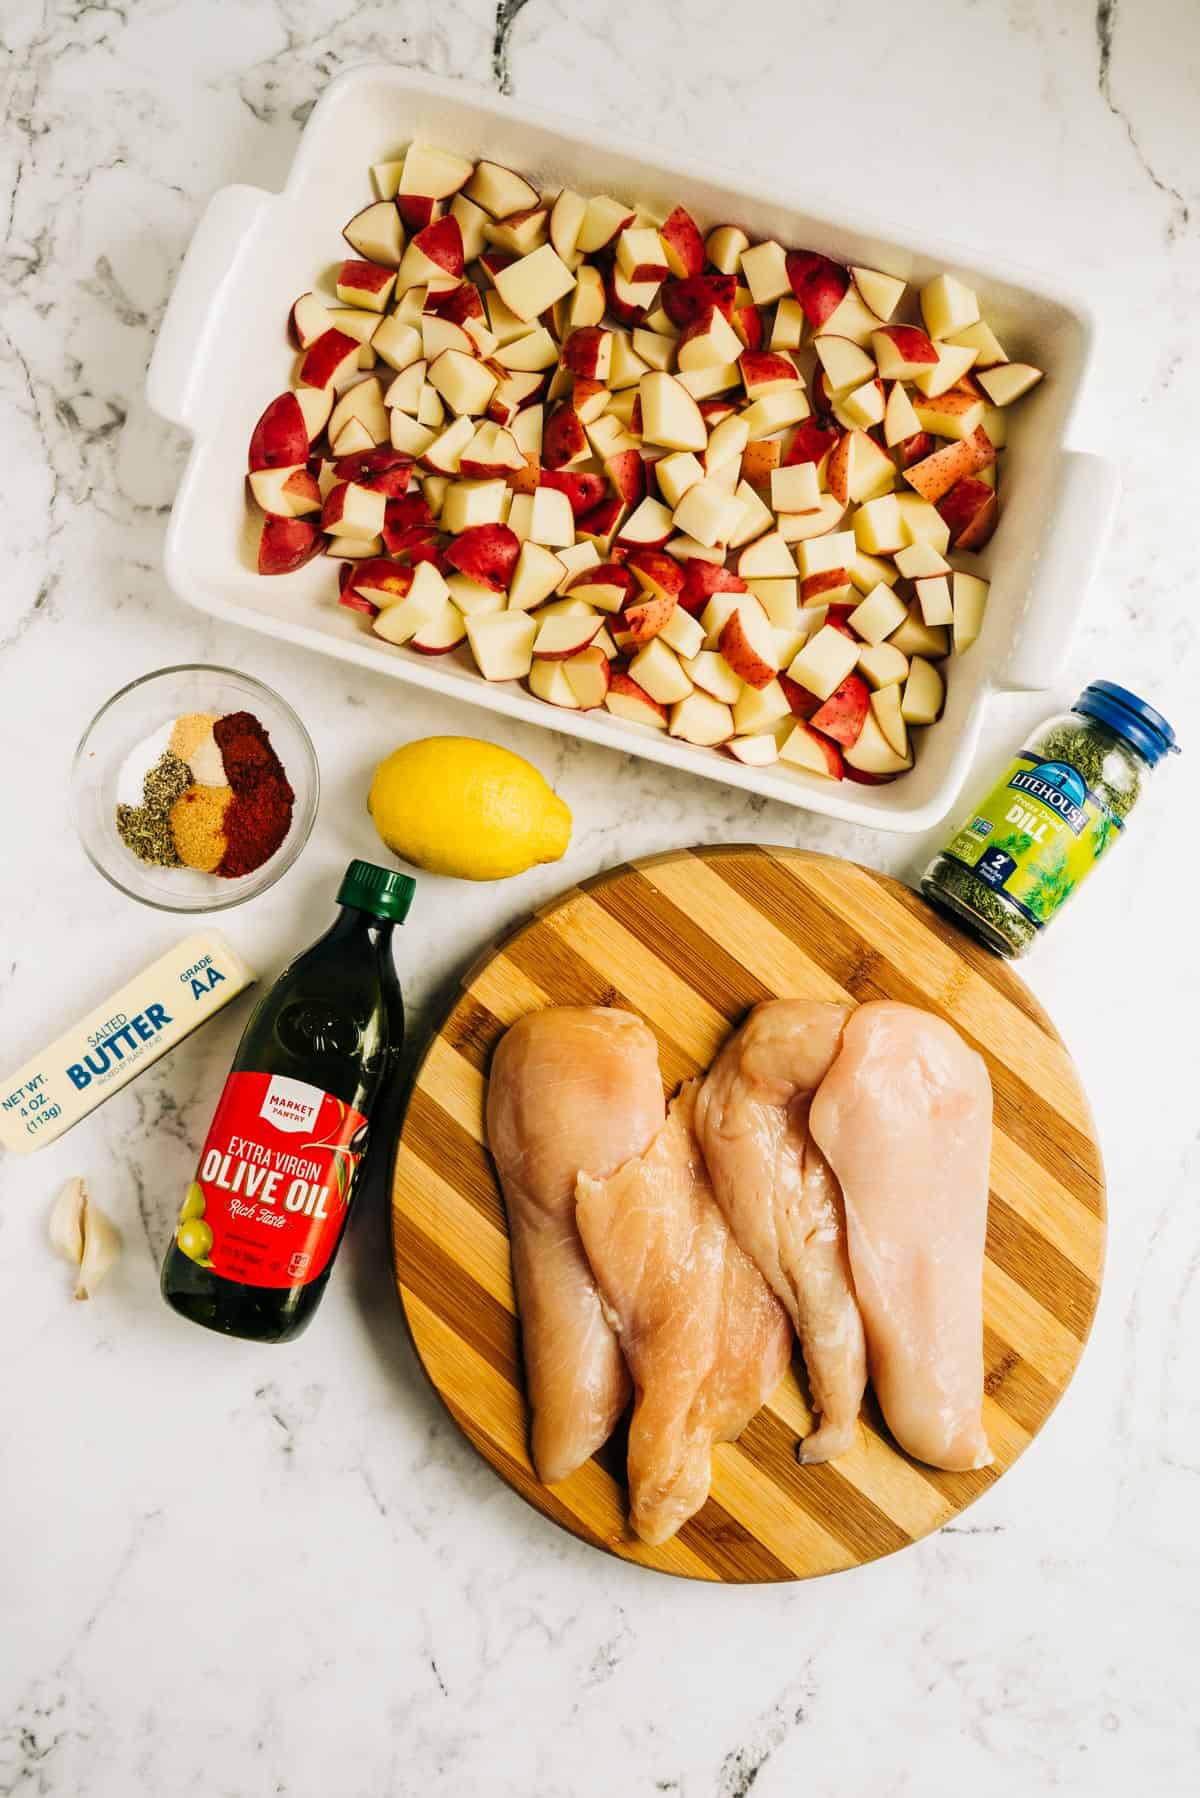 Ingredients for baked chicken and potatoes